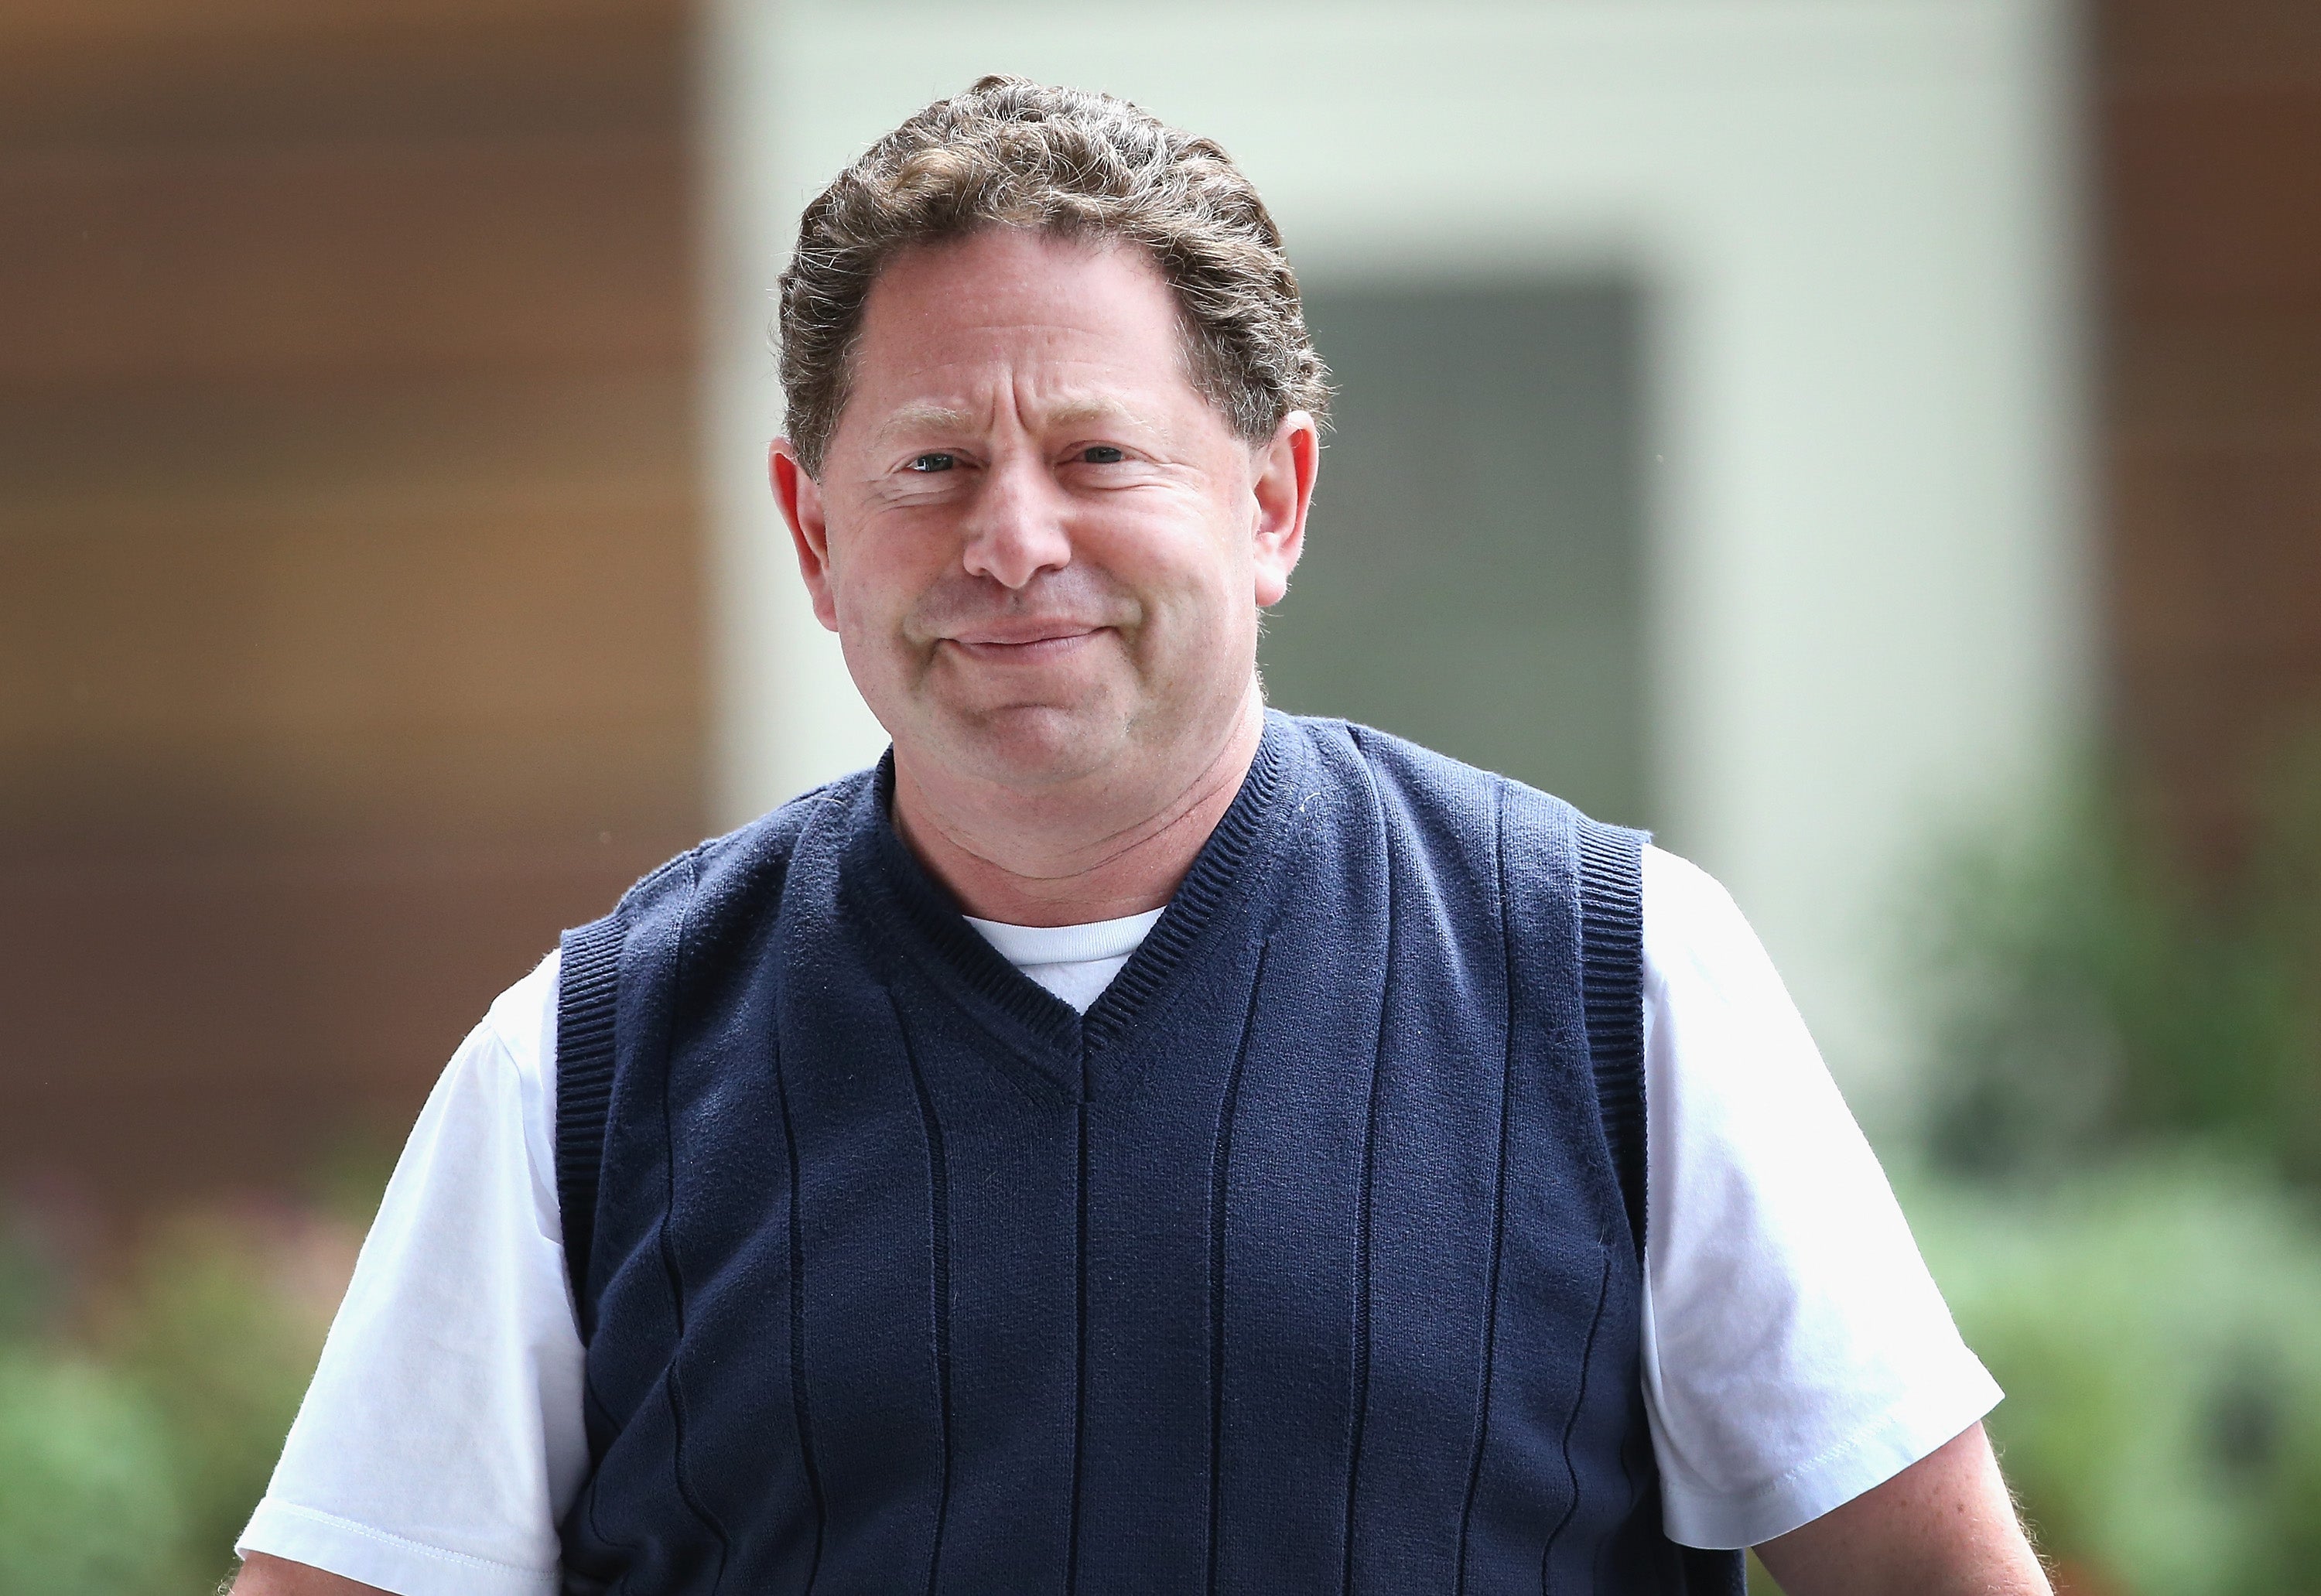 Activision CEO Bobby Kotick Takes a 50% Pay Cut, But It's Not as Big a Cut as It Sounds